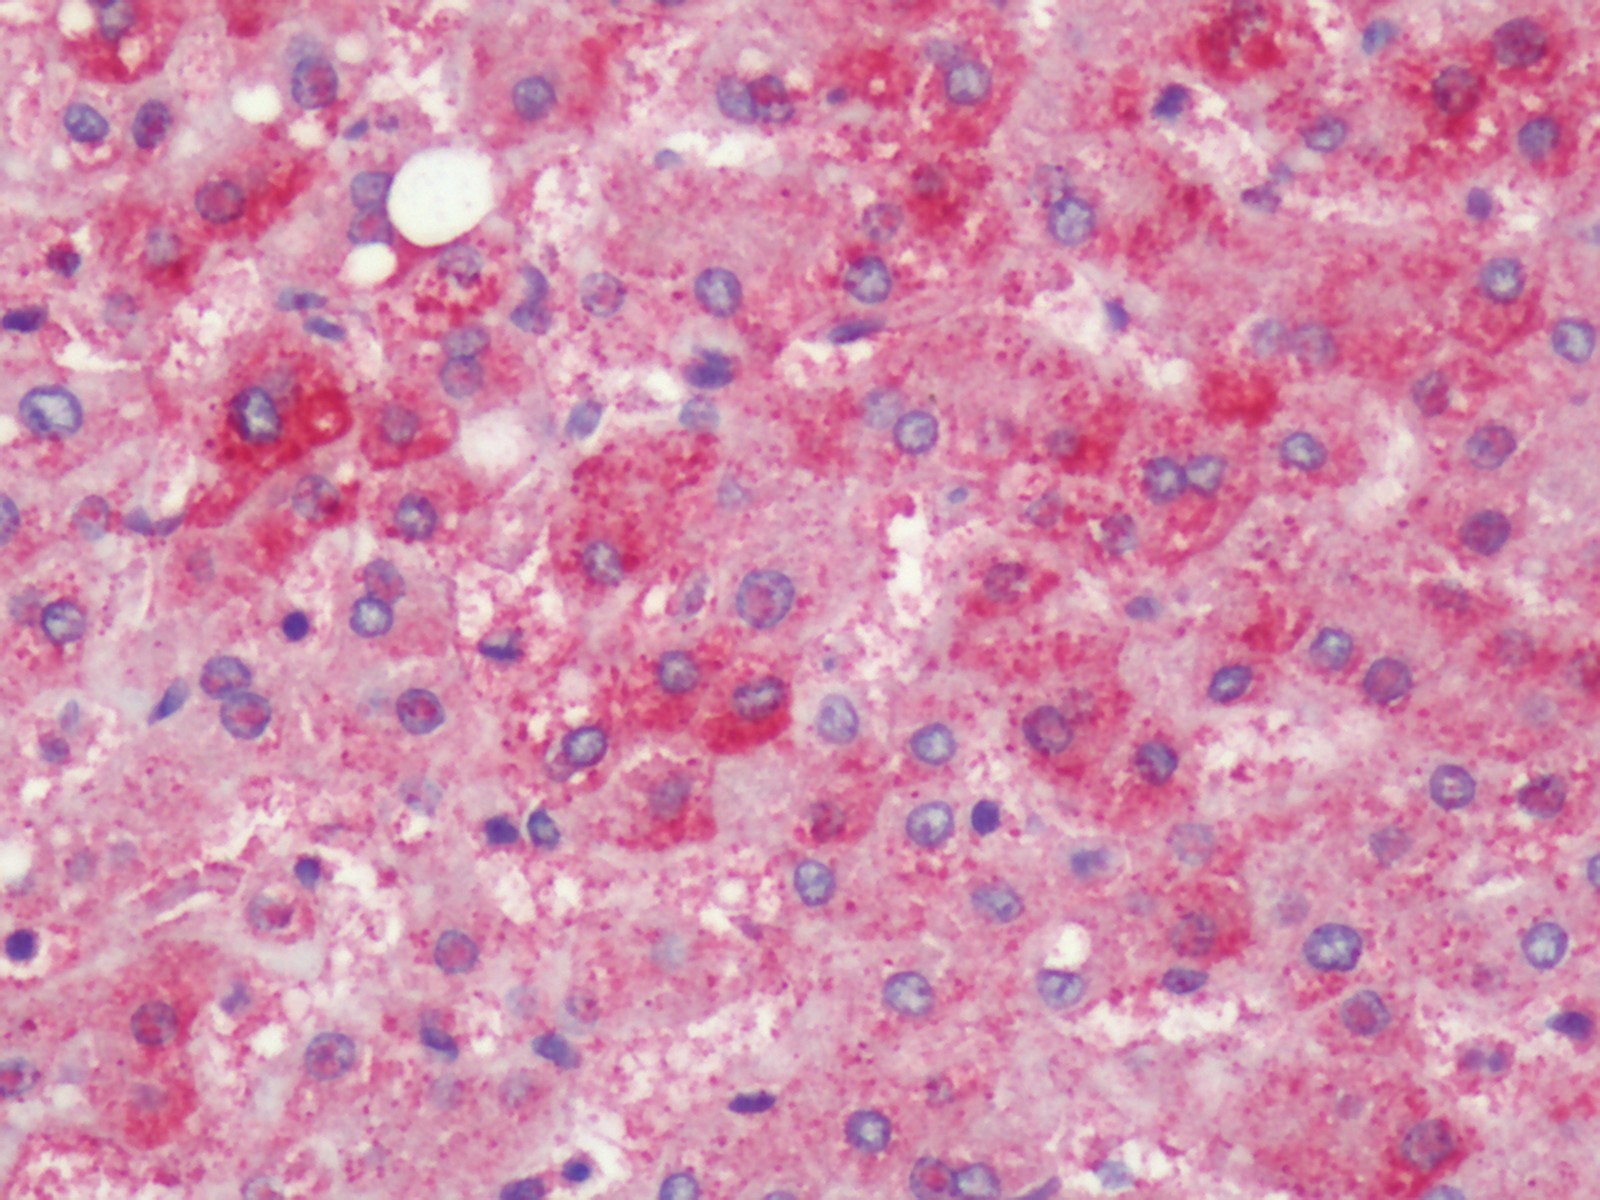 PTGER4 / EP4 Antibody - Human, Liver: Formalin-Fixed Paraffin-Embedded (FFPE)